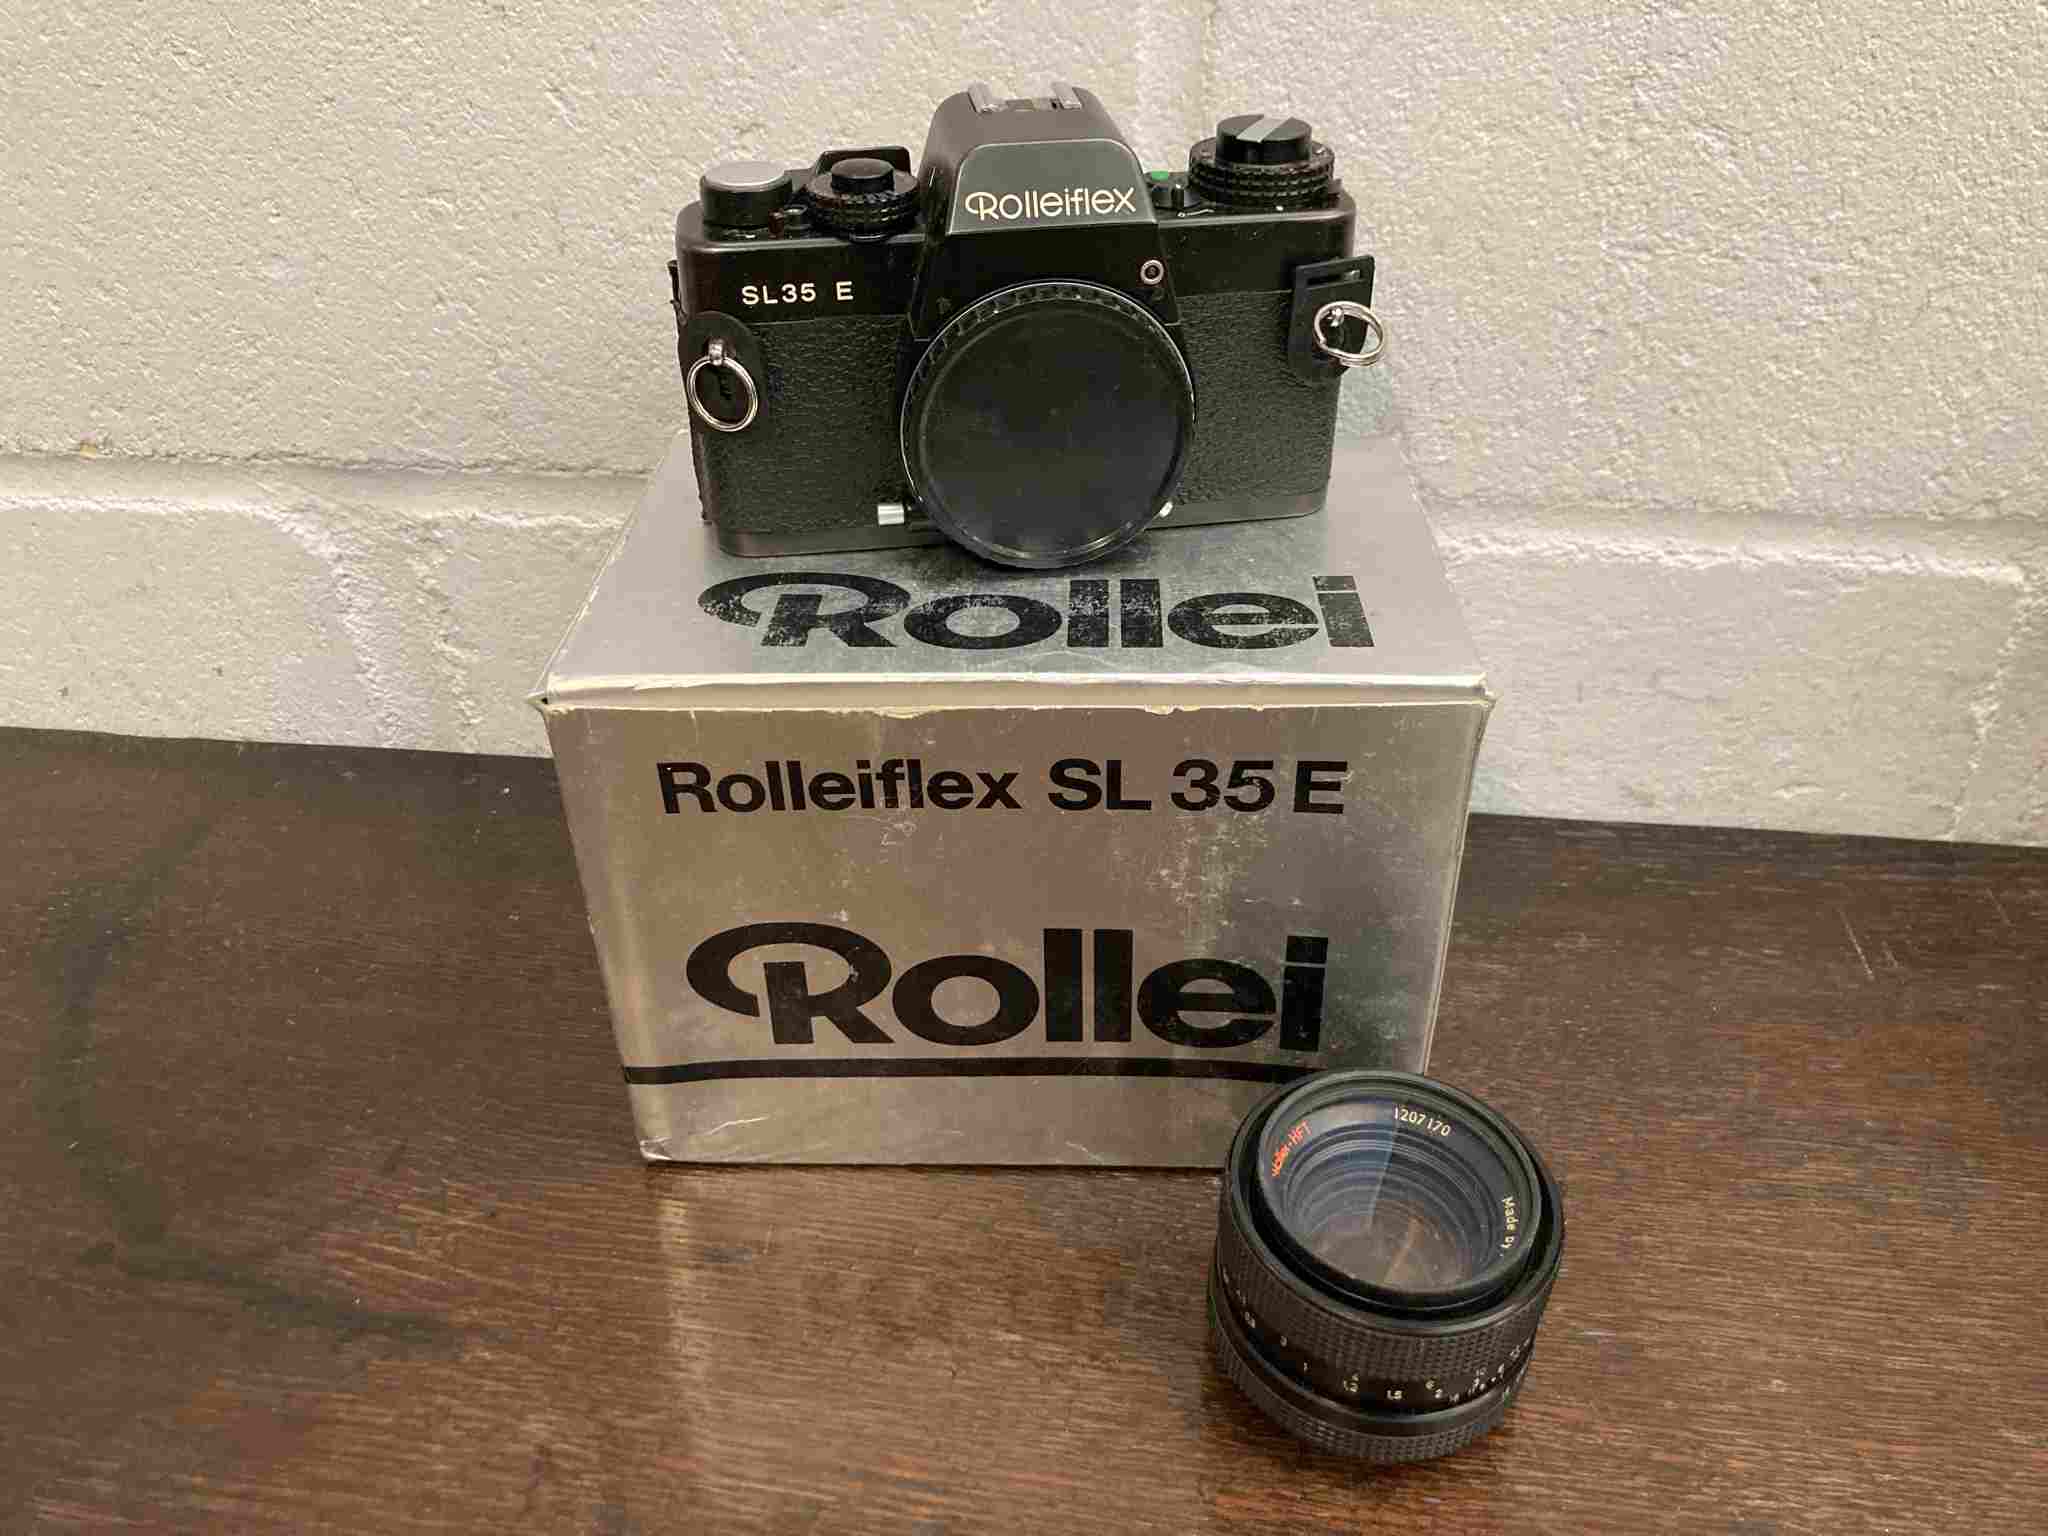 A Rolleiflex SL35E SLR camera with case and 50mm lens